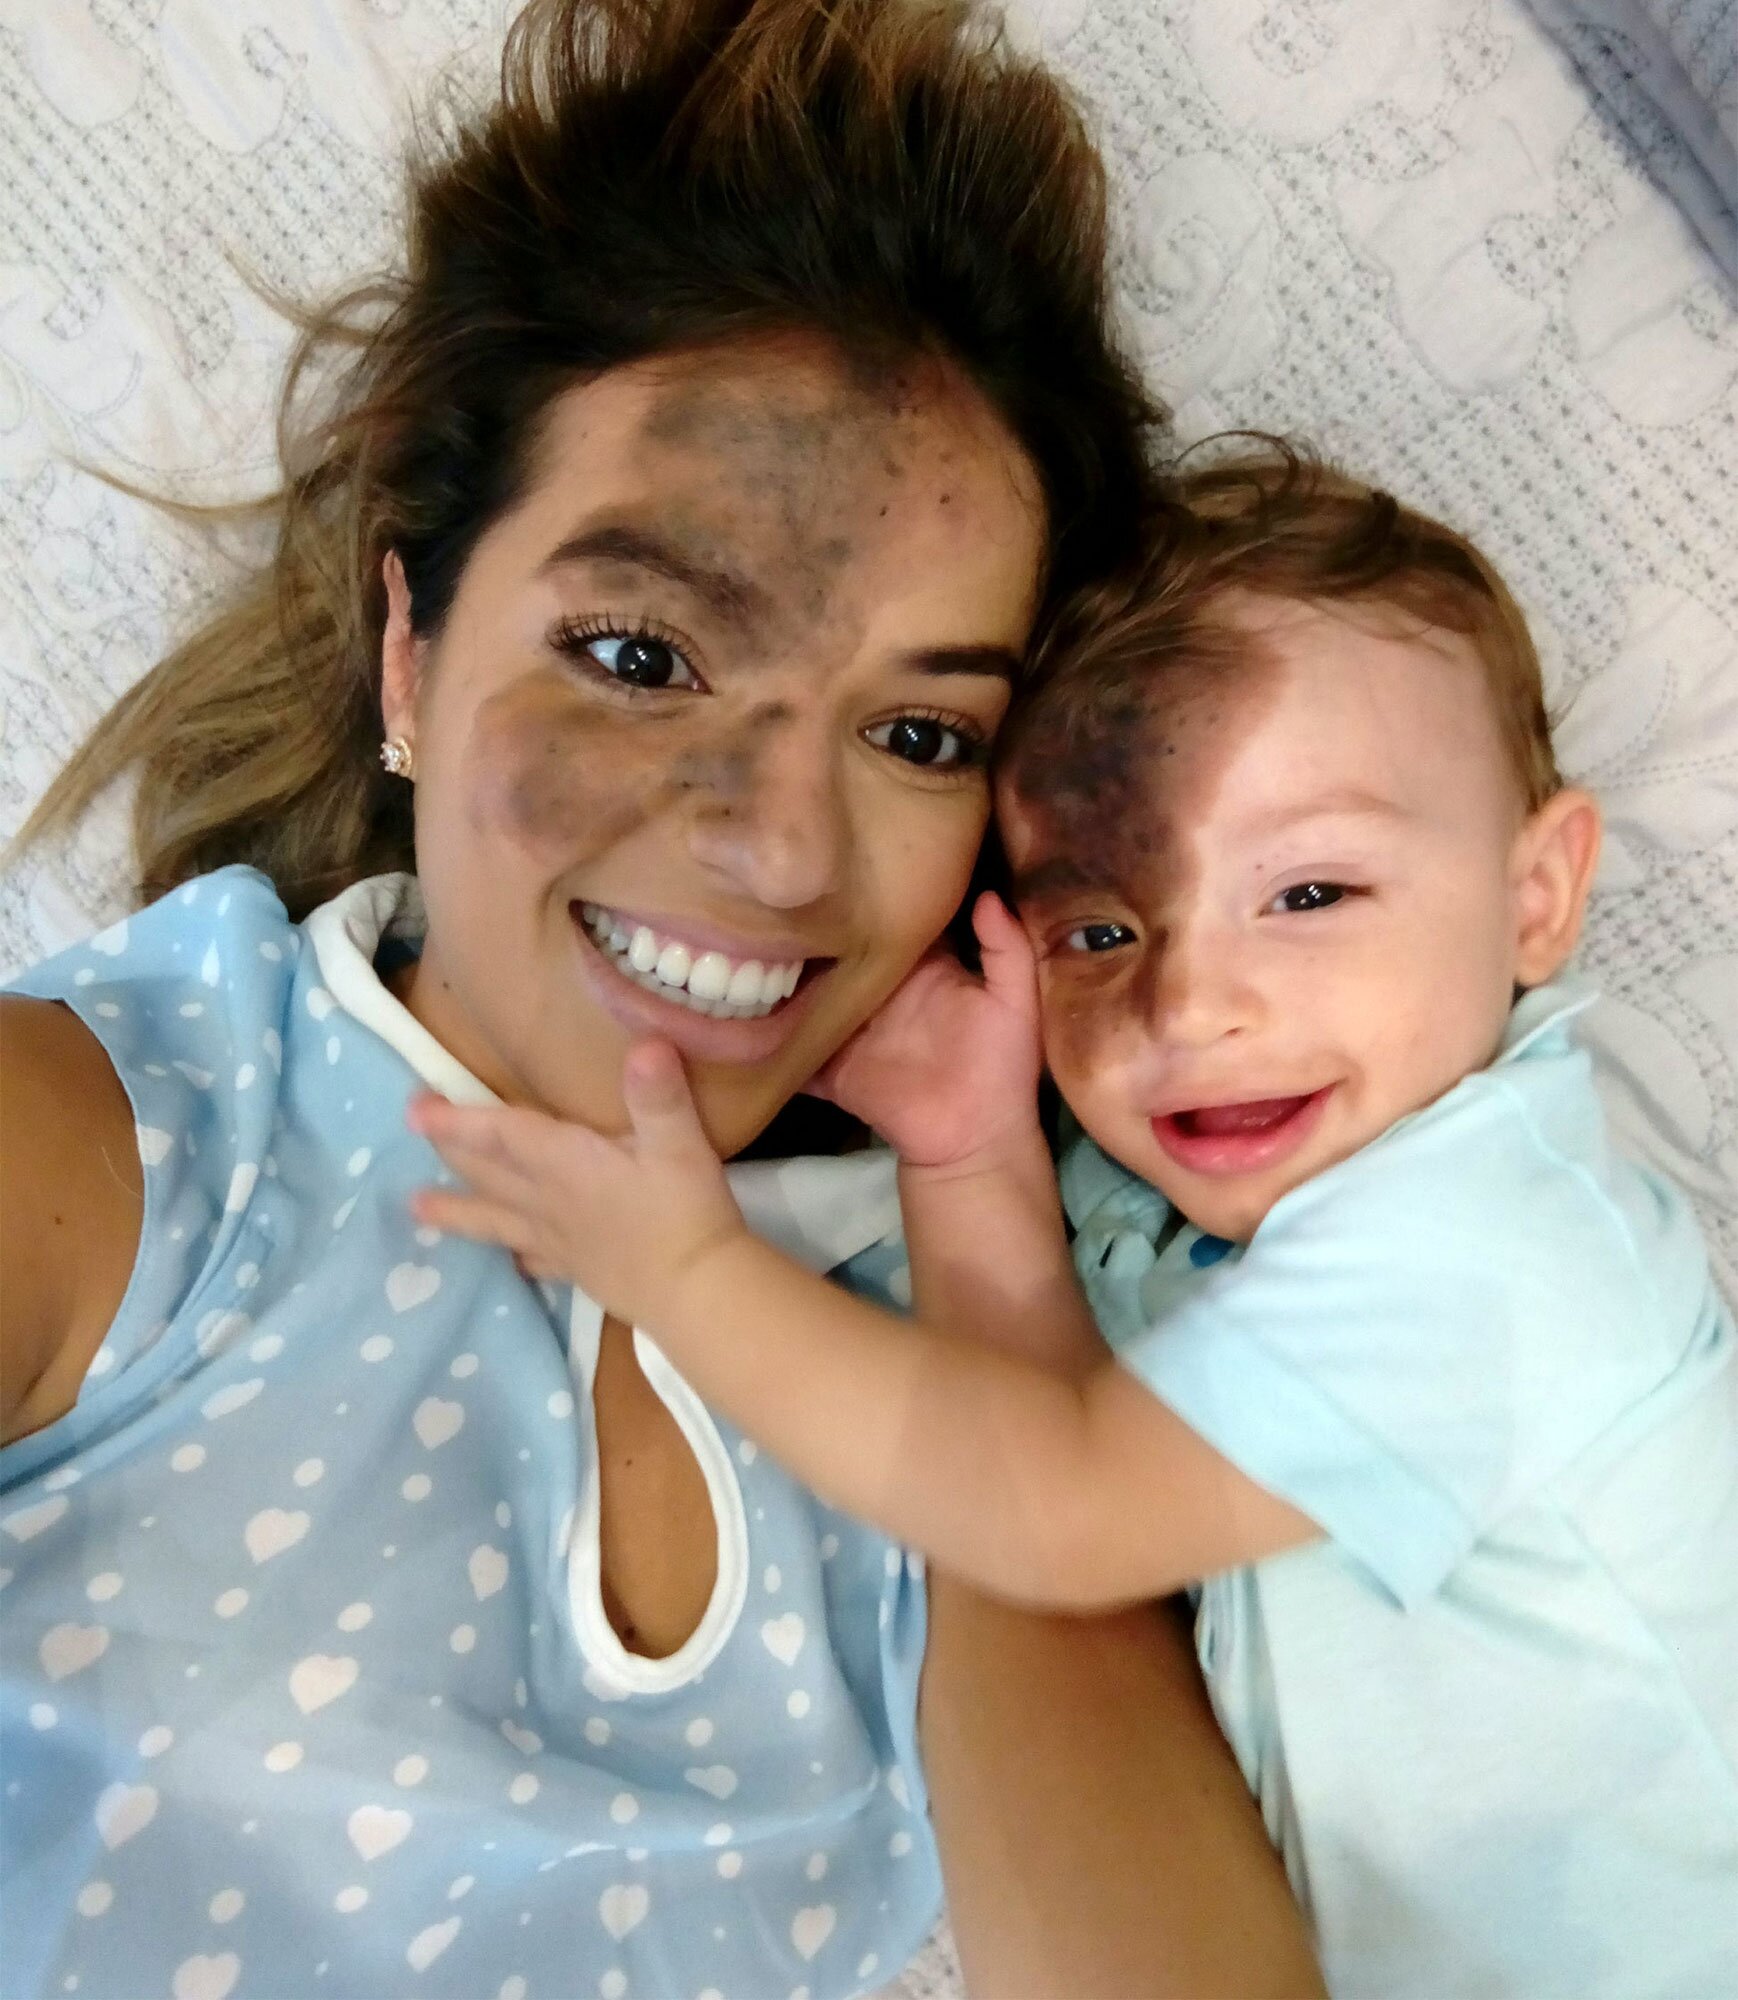 He paints his face the same as his son's birthmark to support him